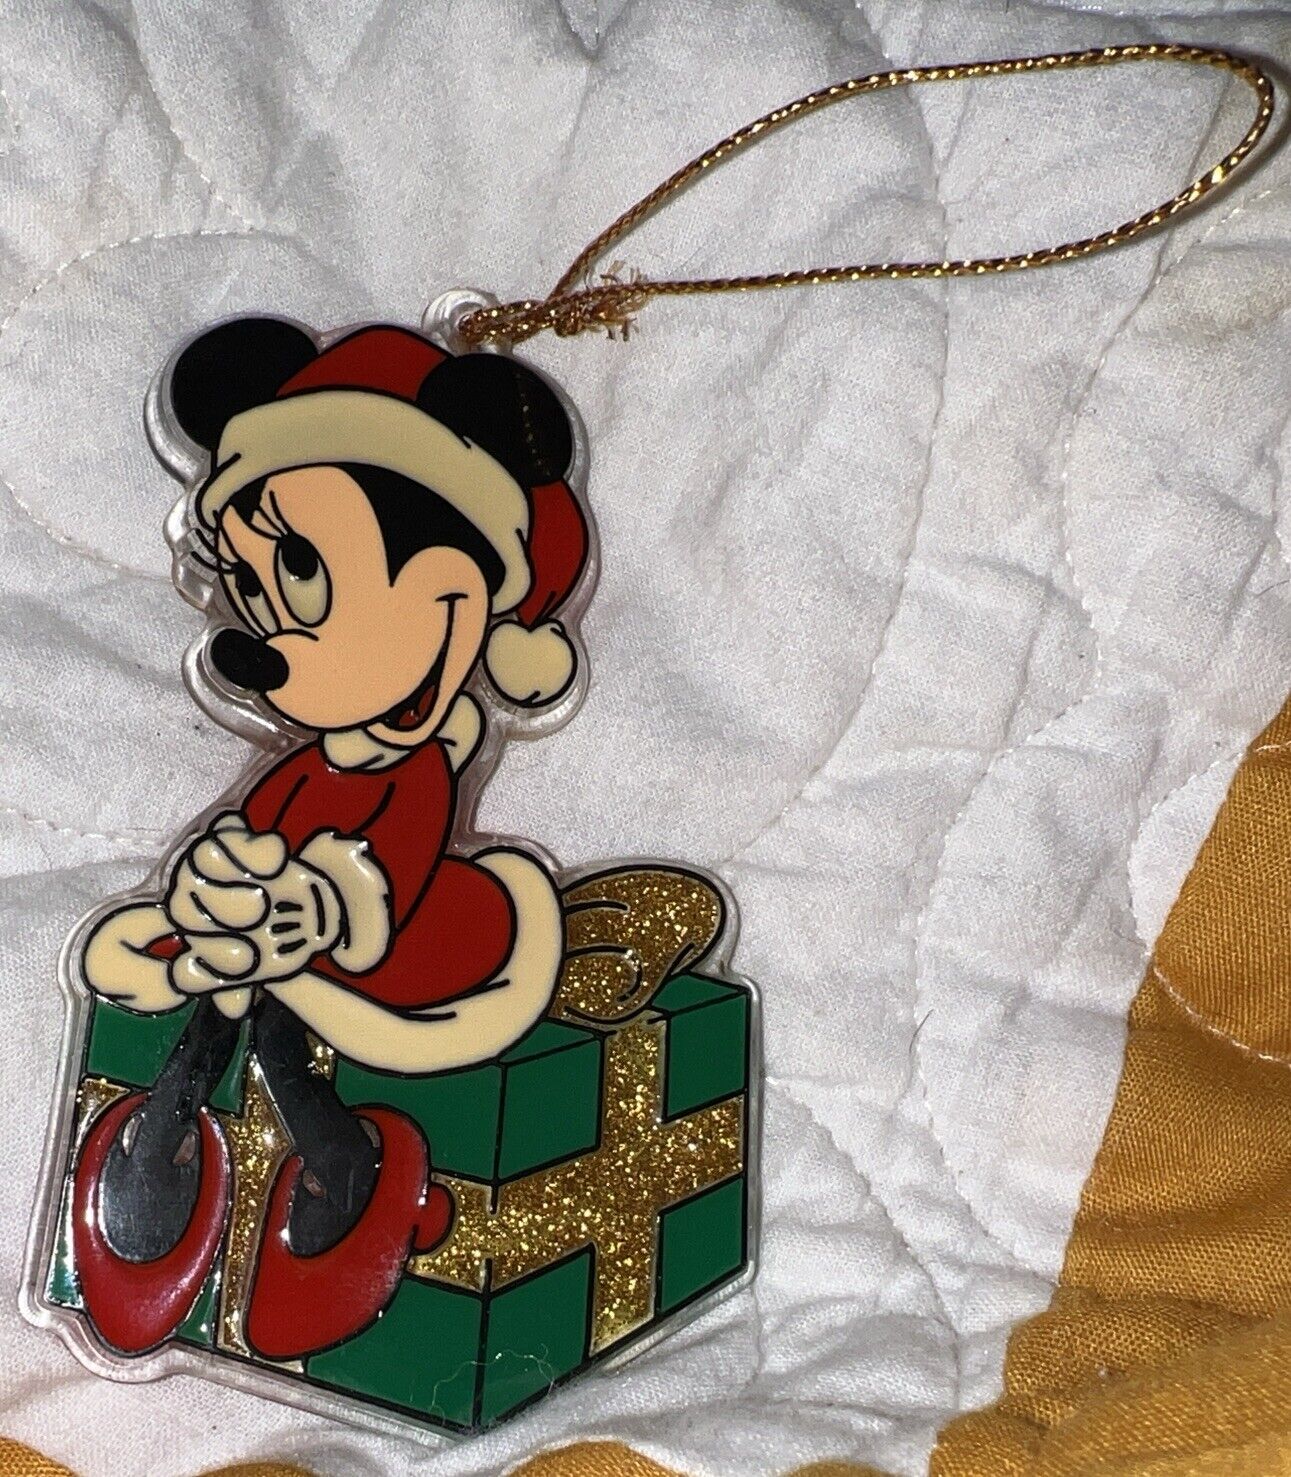 Vintage Disney Minnie Mouse Resin Stained Glass Suncatcher Christmas Ornament